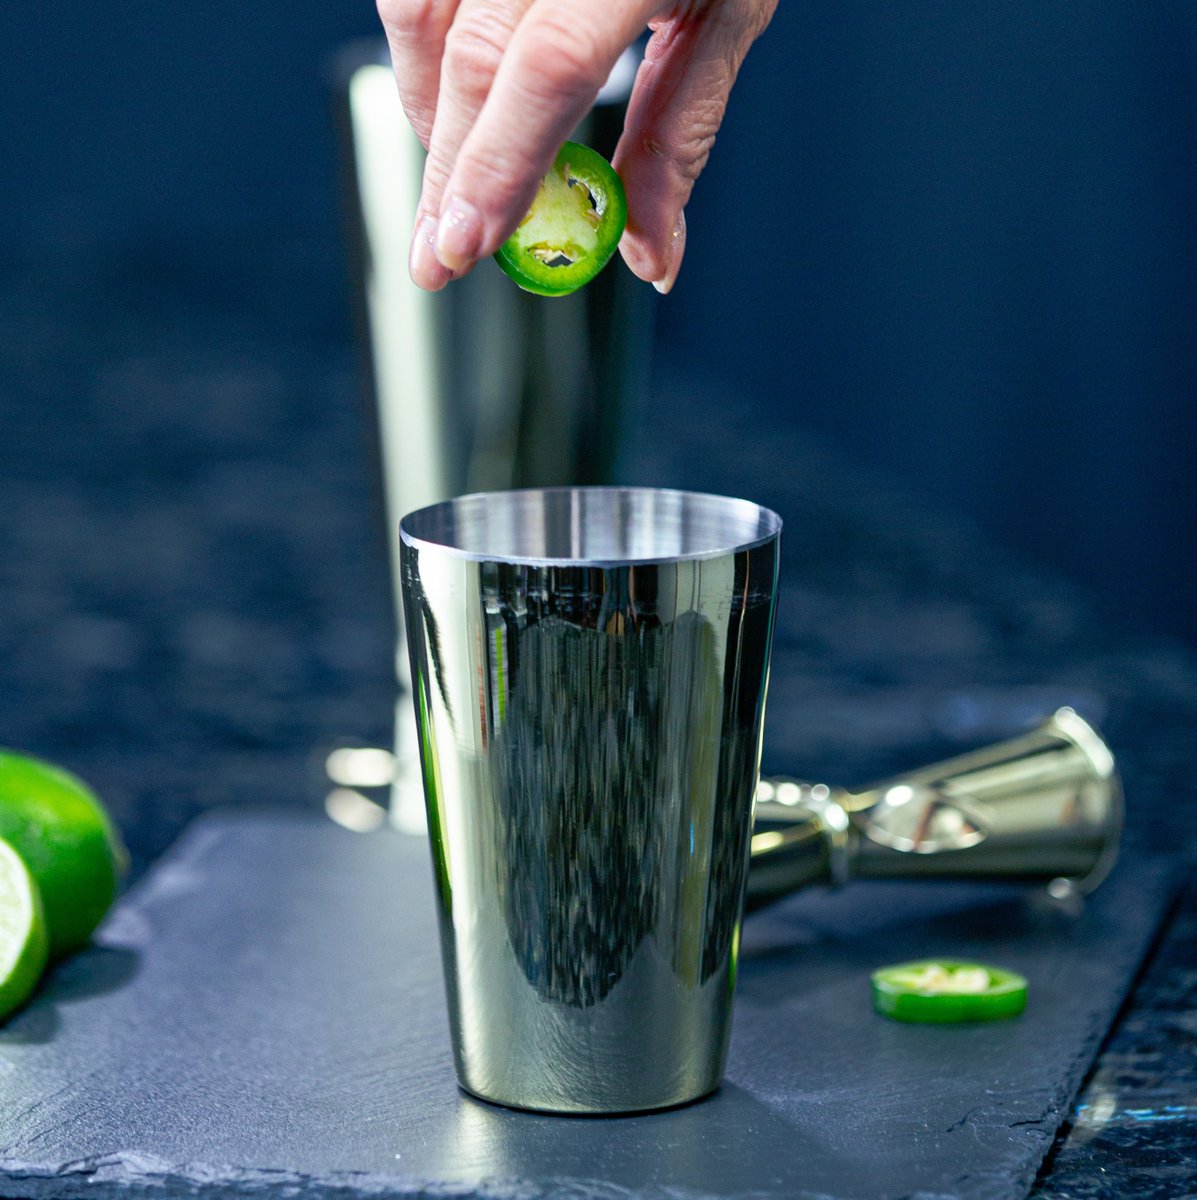 Who else likes a cocktail with a little bit of spice? #homebartender